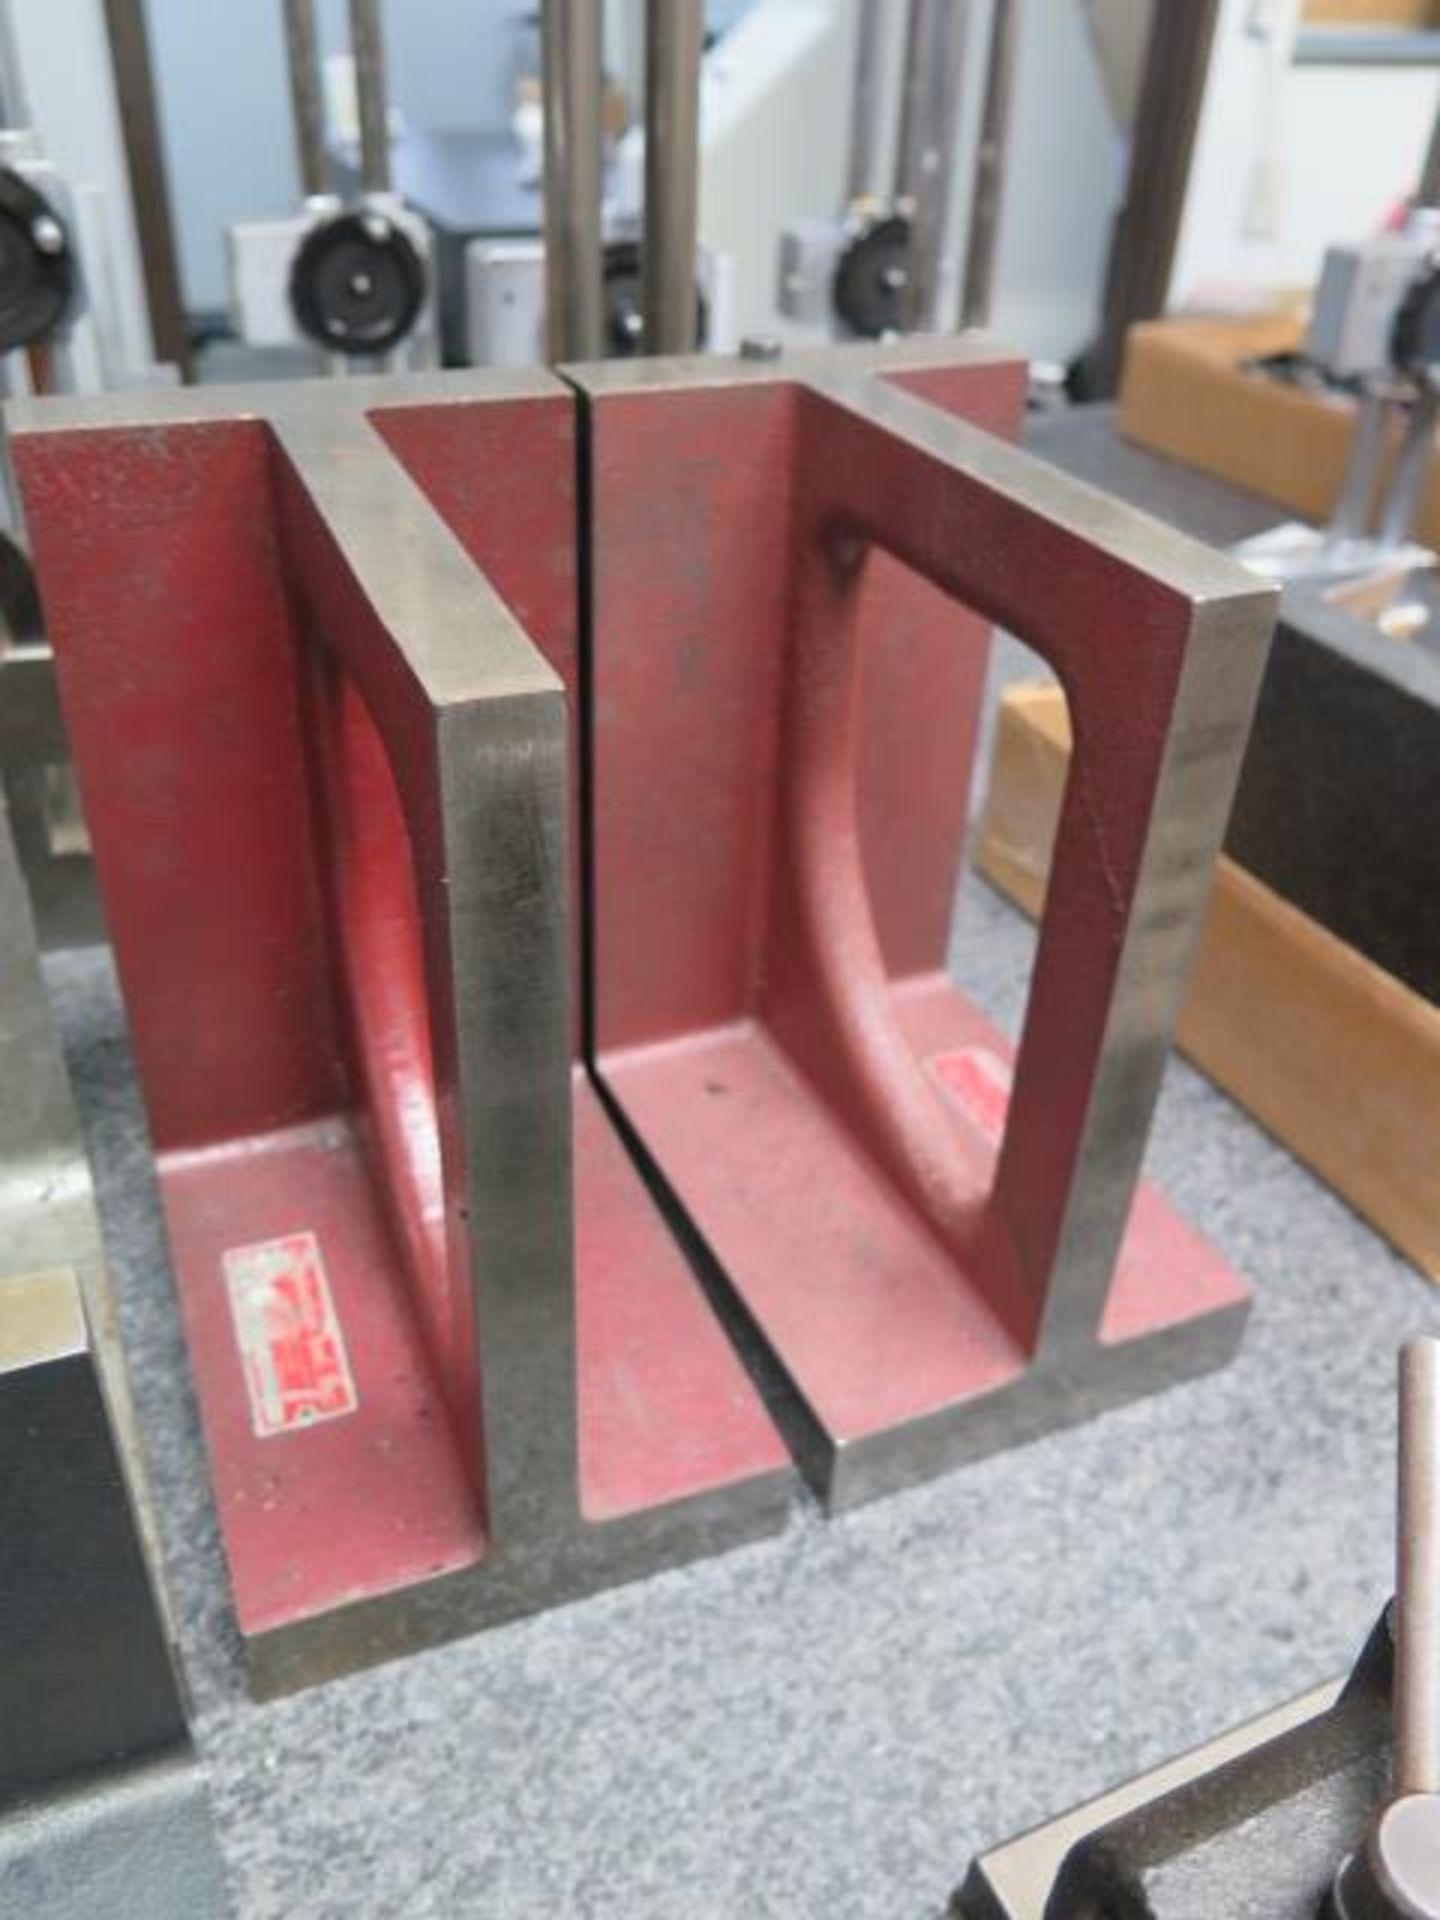 Suburban 5 ½” x 10” x 8” Angle Masters (2) and (2) Angle Plates (SOLD AS-IS - NO WARRANTY) - Image 3 of 7